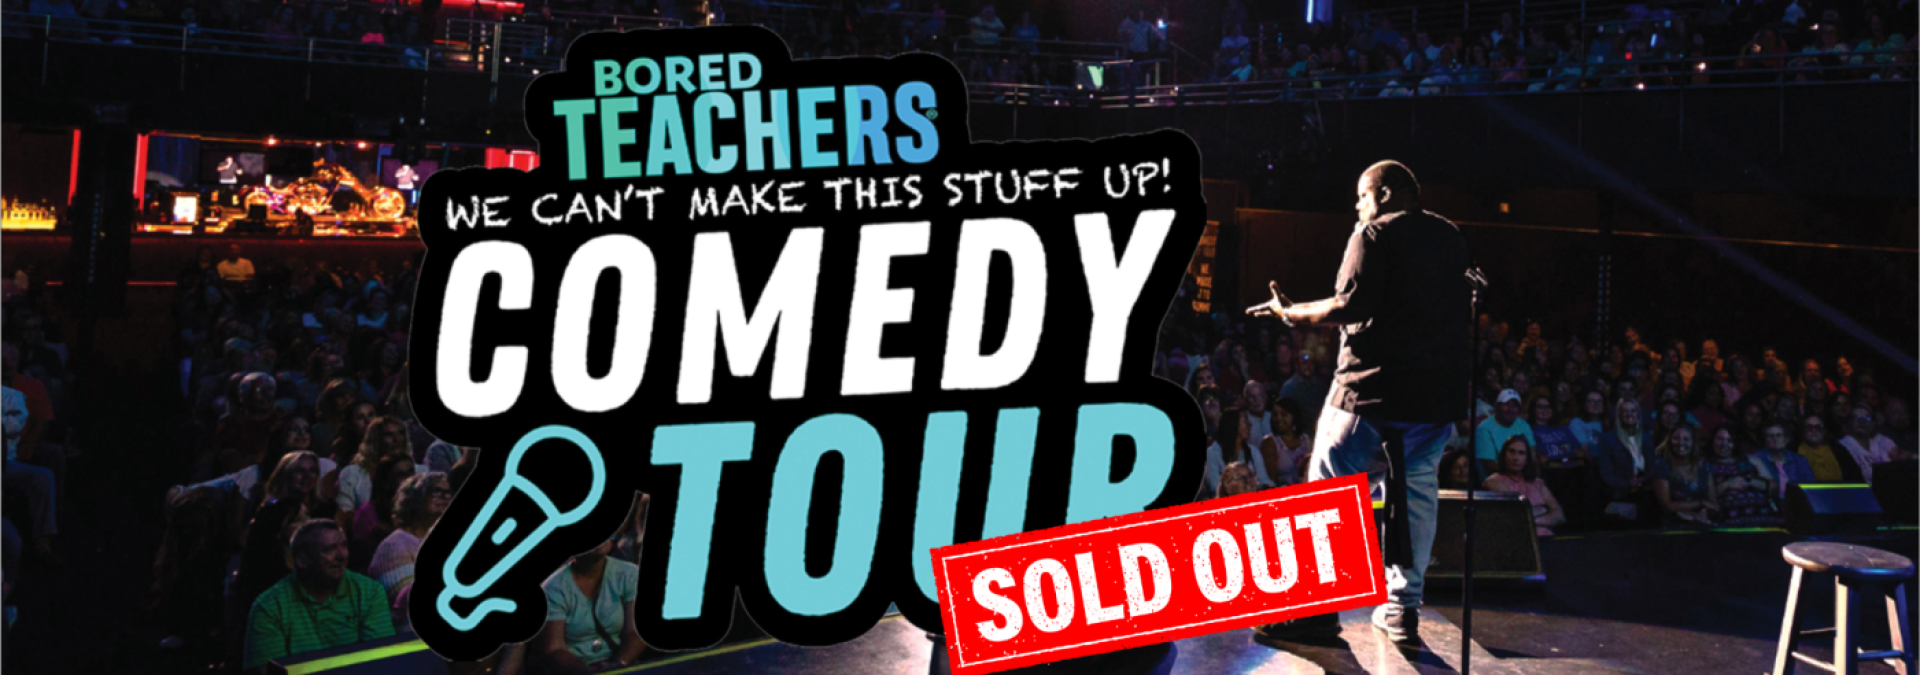 Bored Teachers Sold Out Website banner